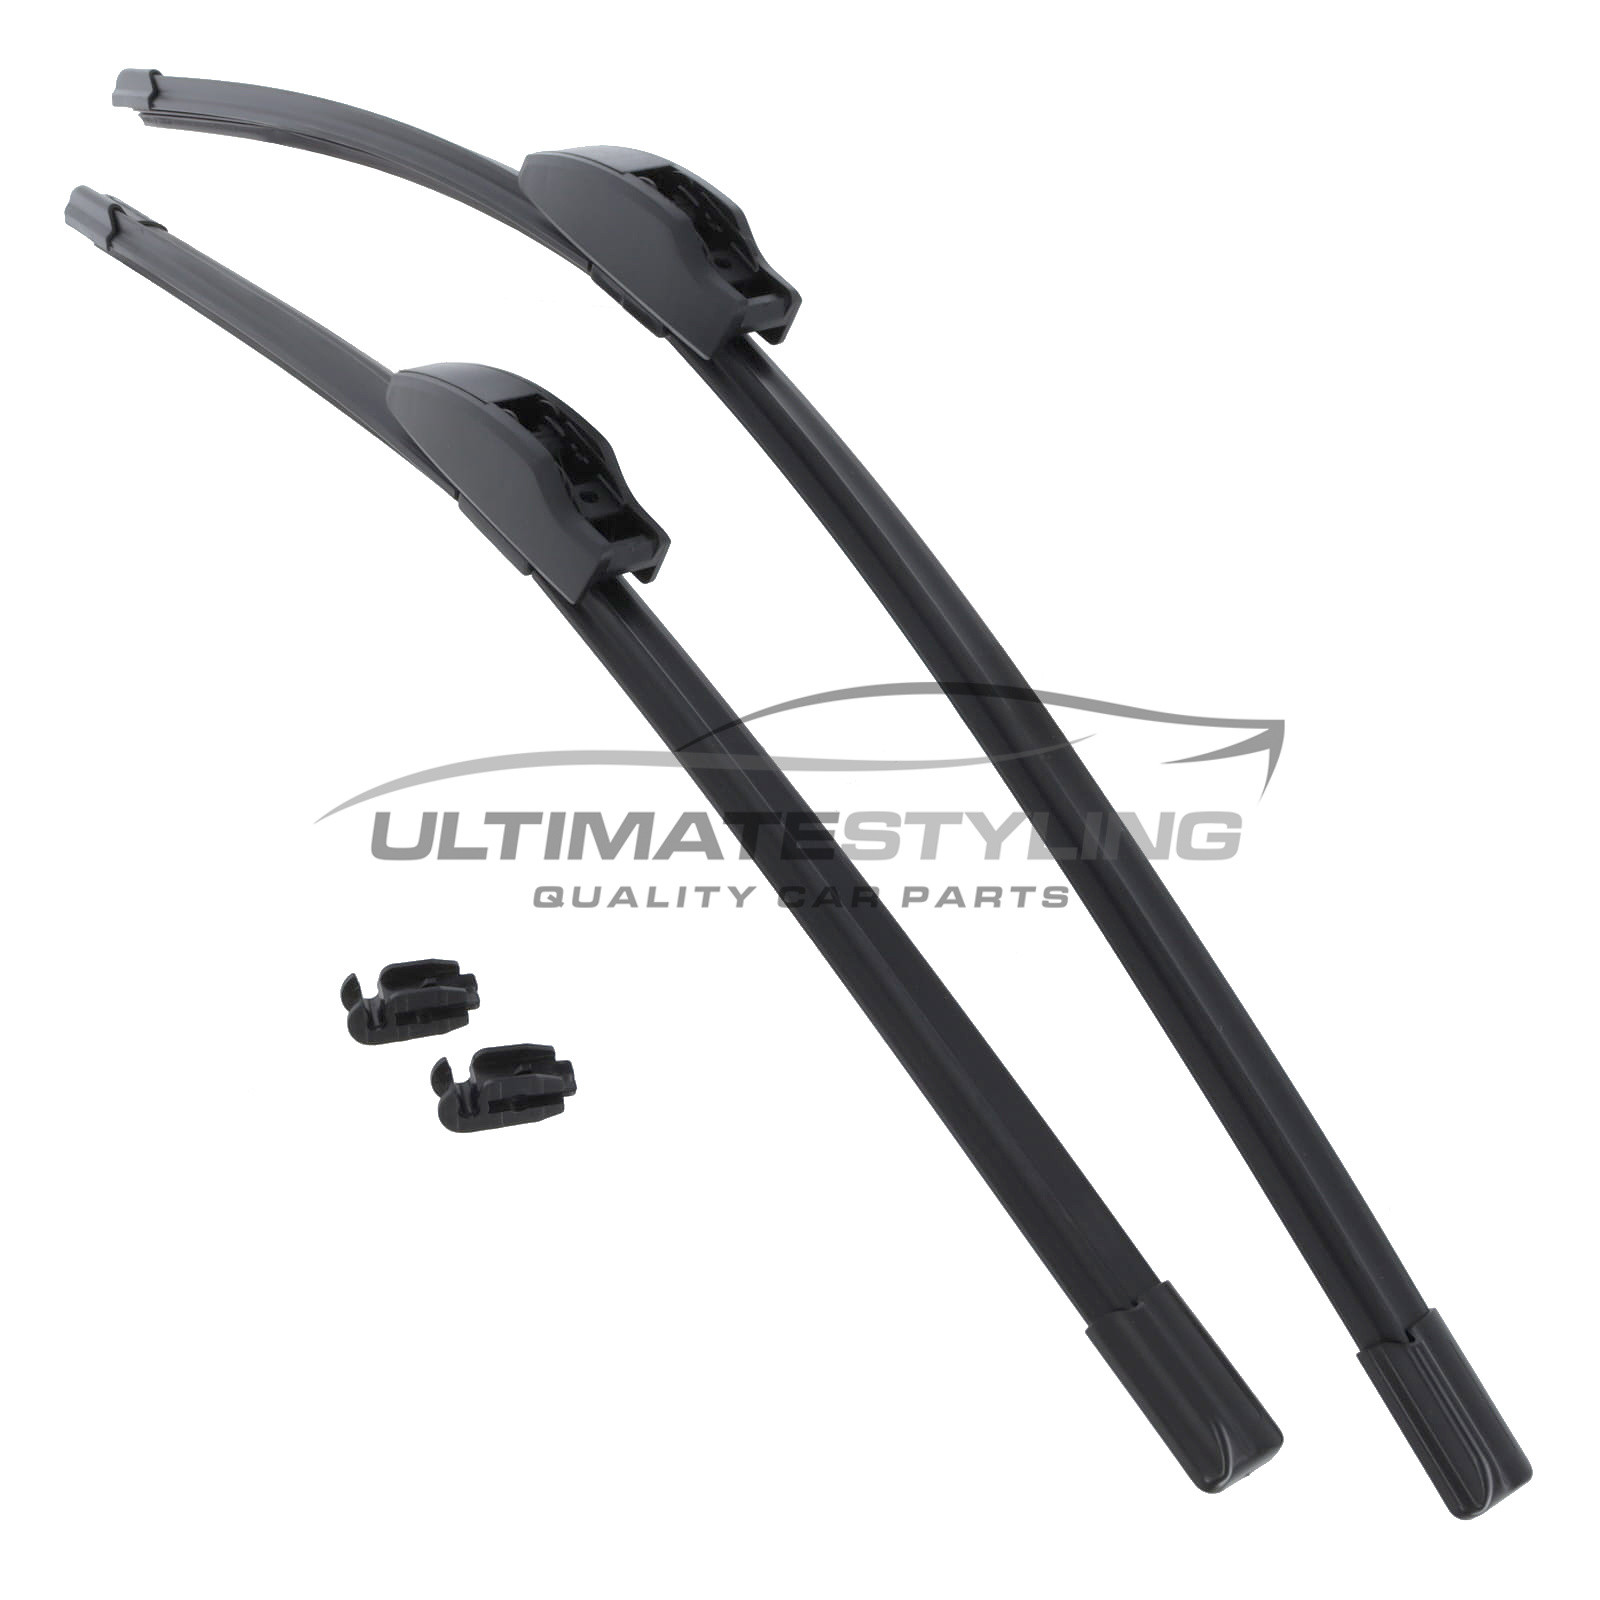 Drivers Side & Passenger Side (Front) Wiper Blades for Vauxhall Vectra